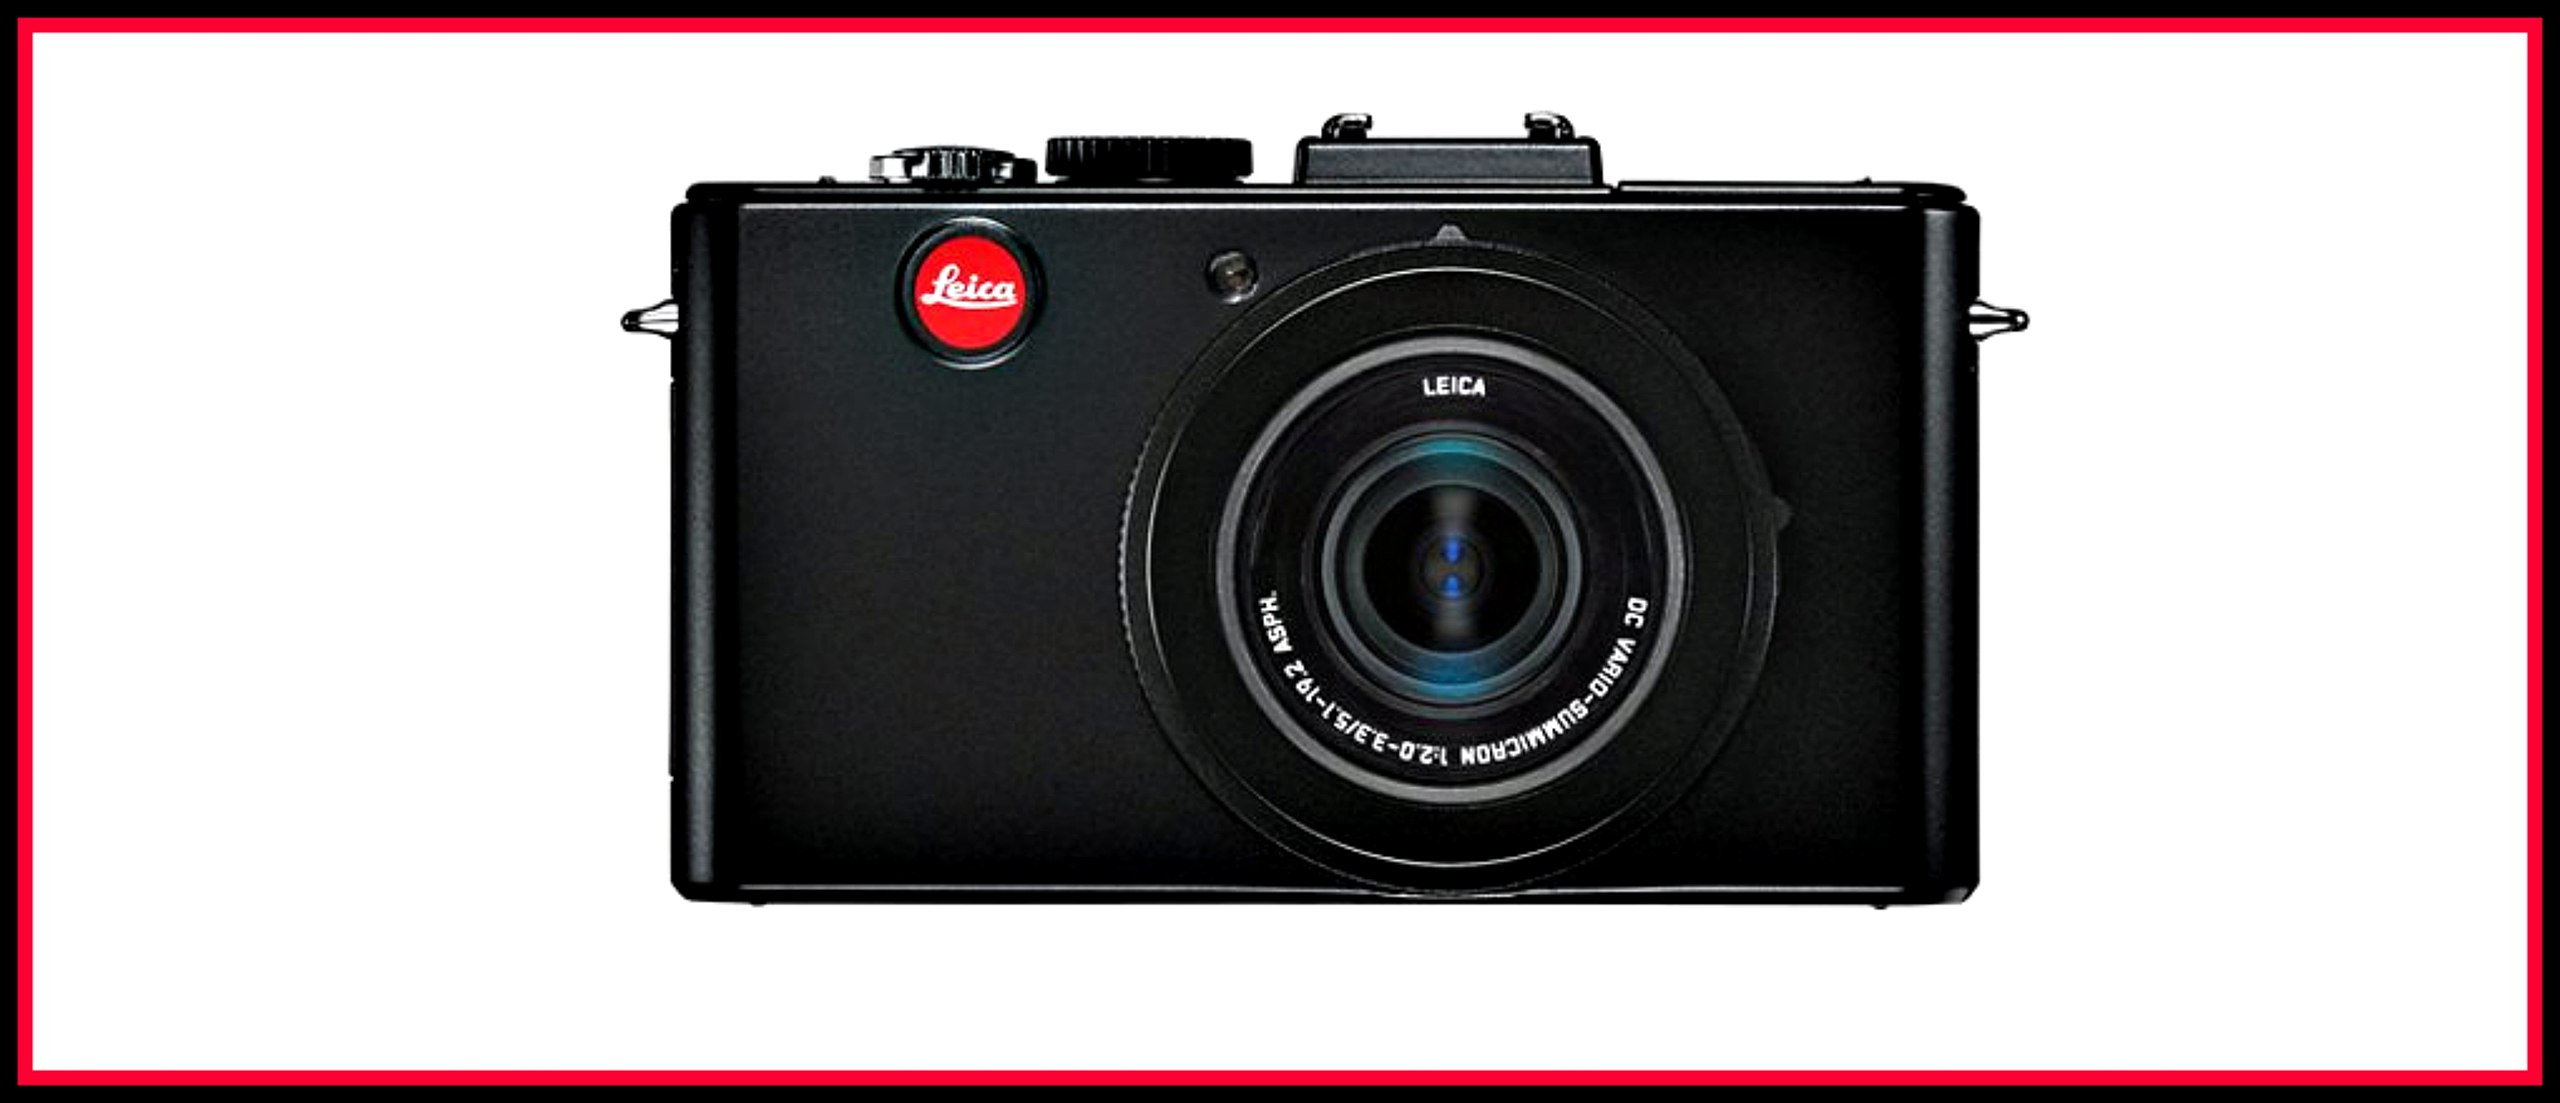 File:Leica-D-Lux-3.jpg - Wikimedia Commons